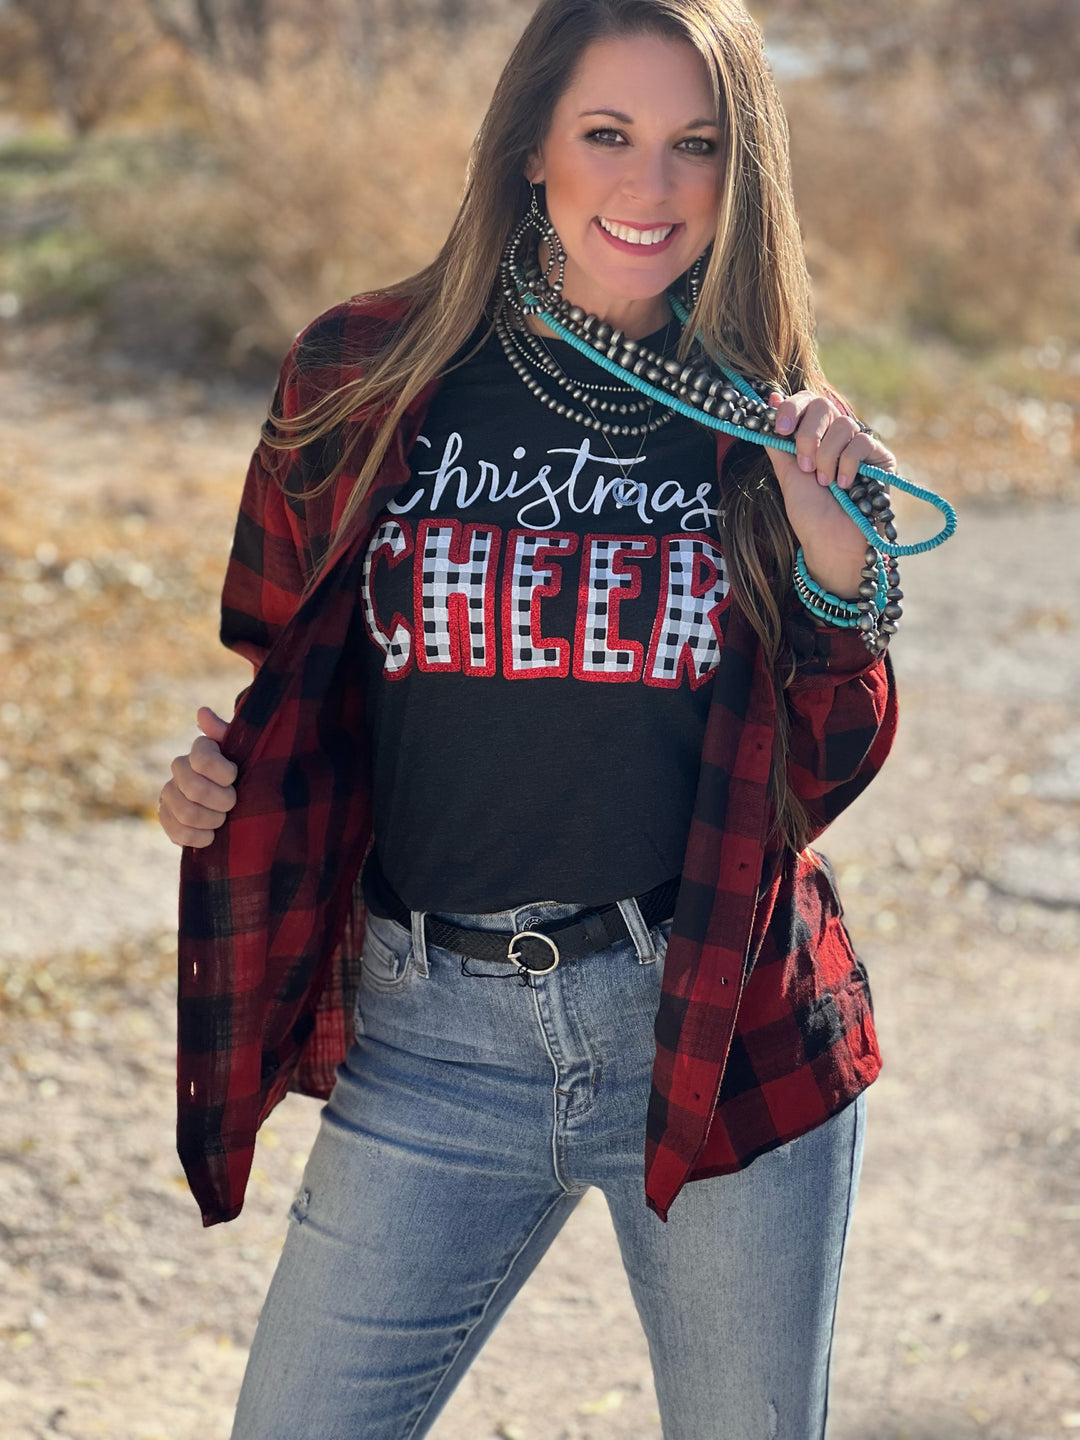 Christmas Cheer Graphic Tee by Texas True Threads